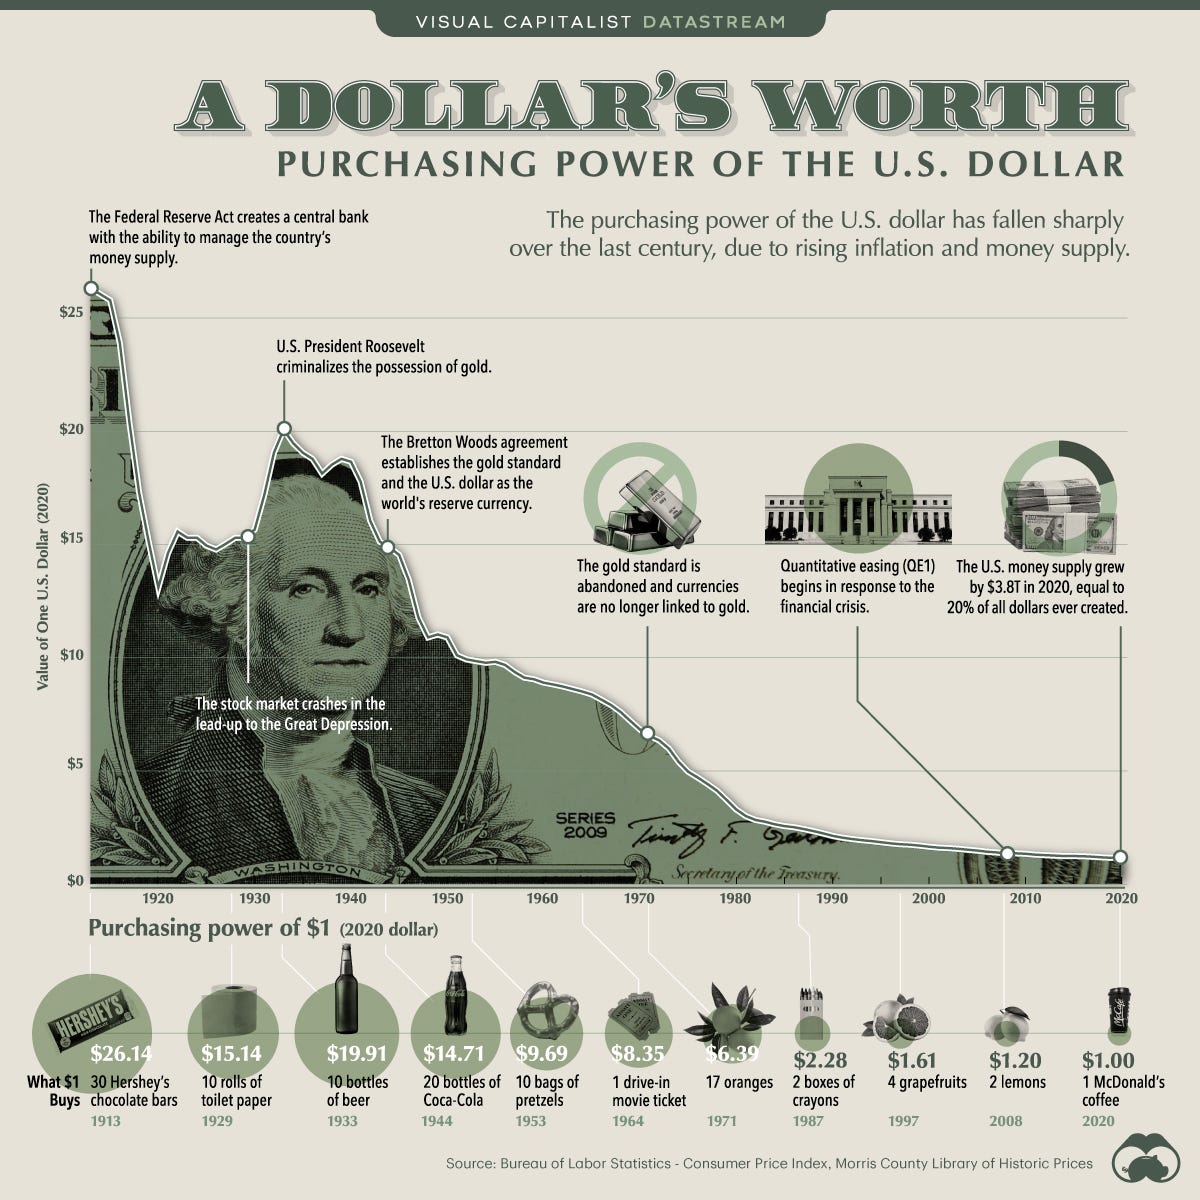 Visualizing the Purchasing Power of the U.S. Dollar Over Time